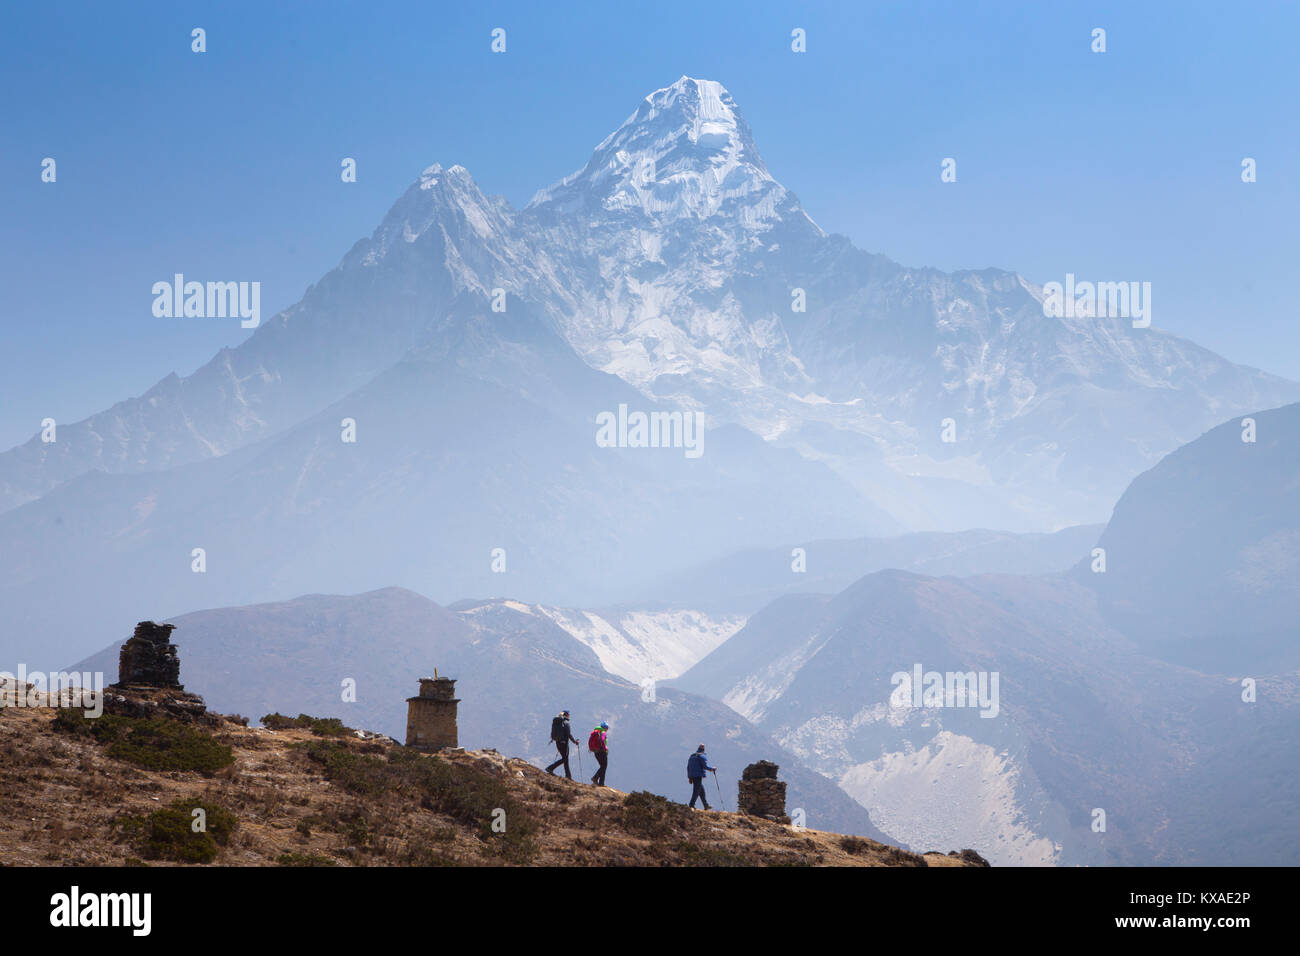 Three hikers descending from Pangboche monastery to continue their hike to Everest Base Camp, in the background Ama Dablam mountain. Stock Photo